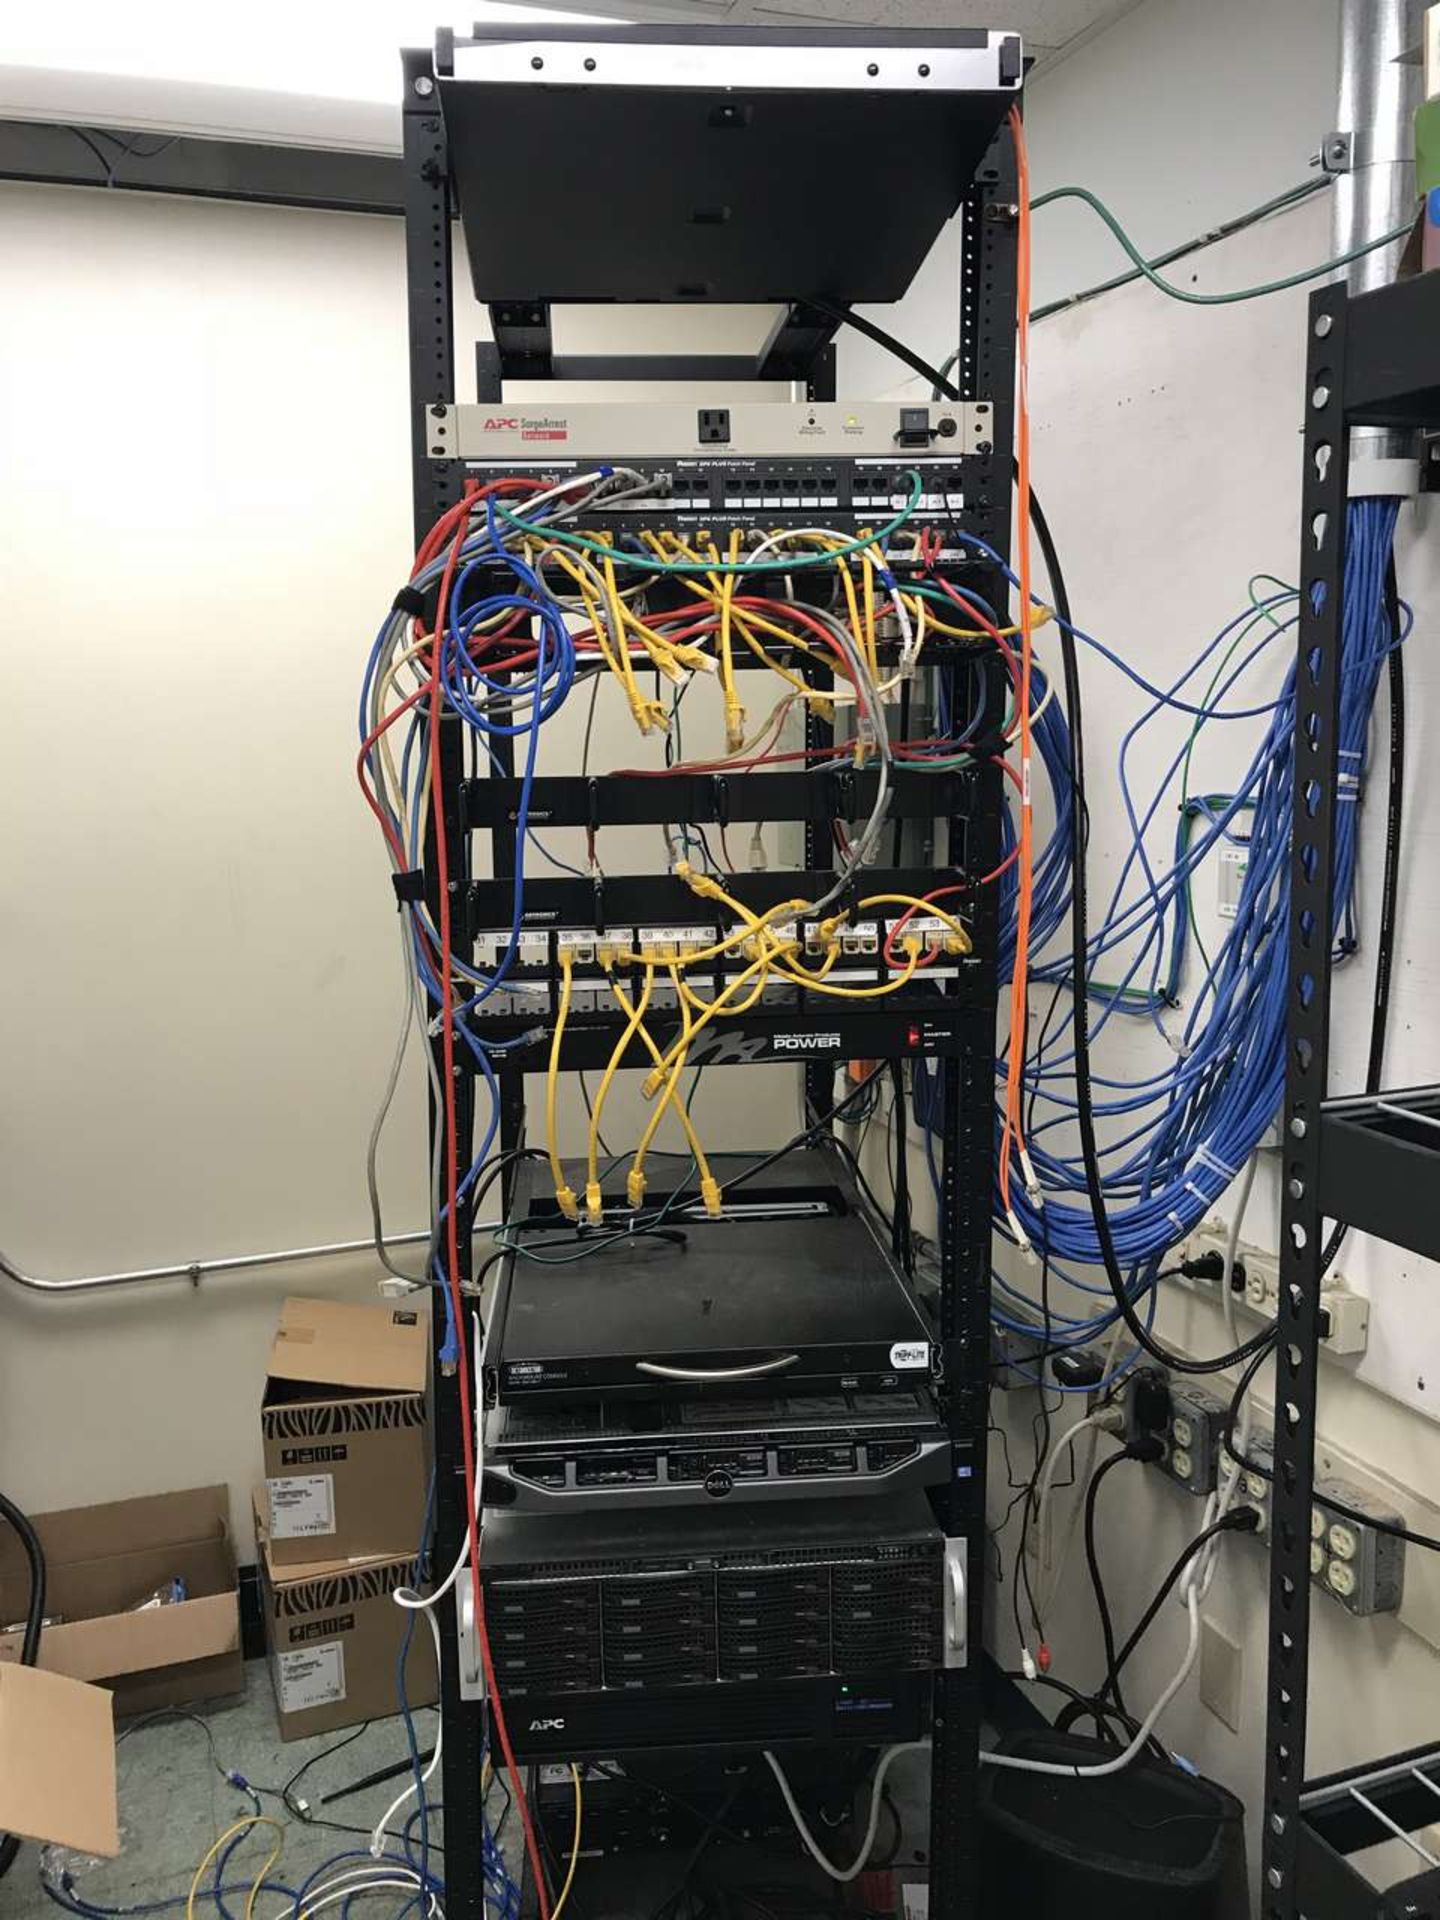 Contents of IT/Server Room